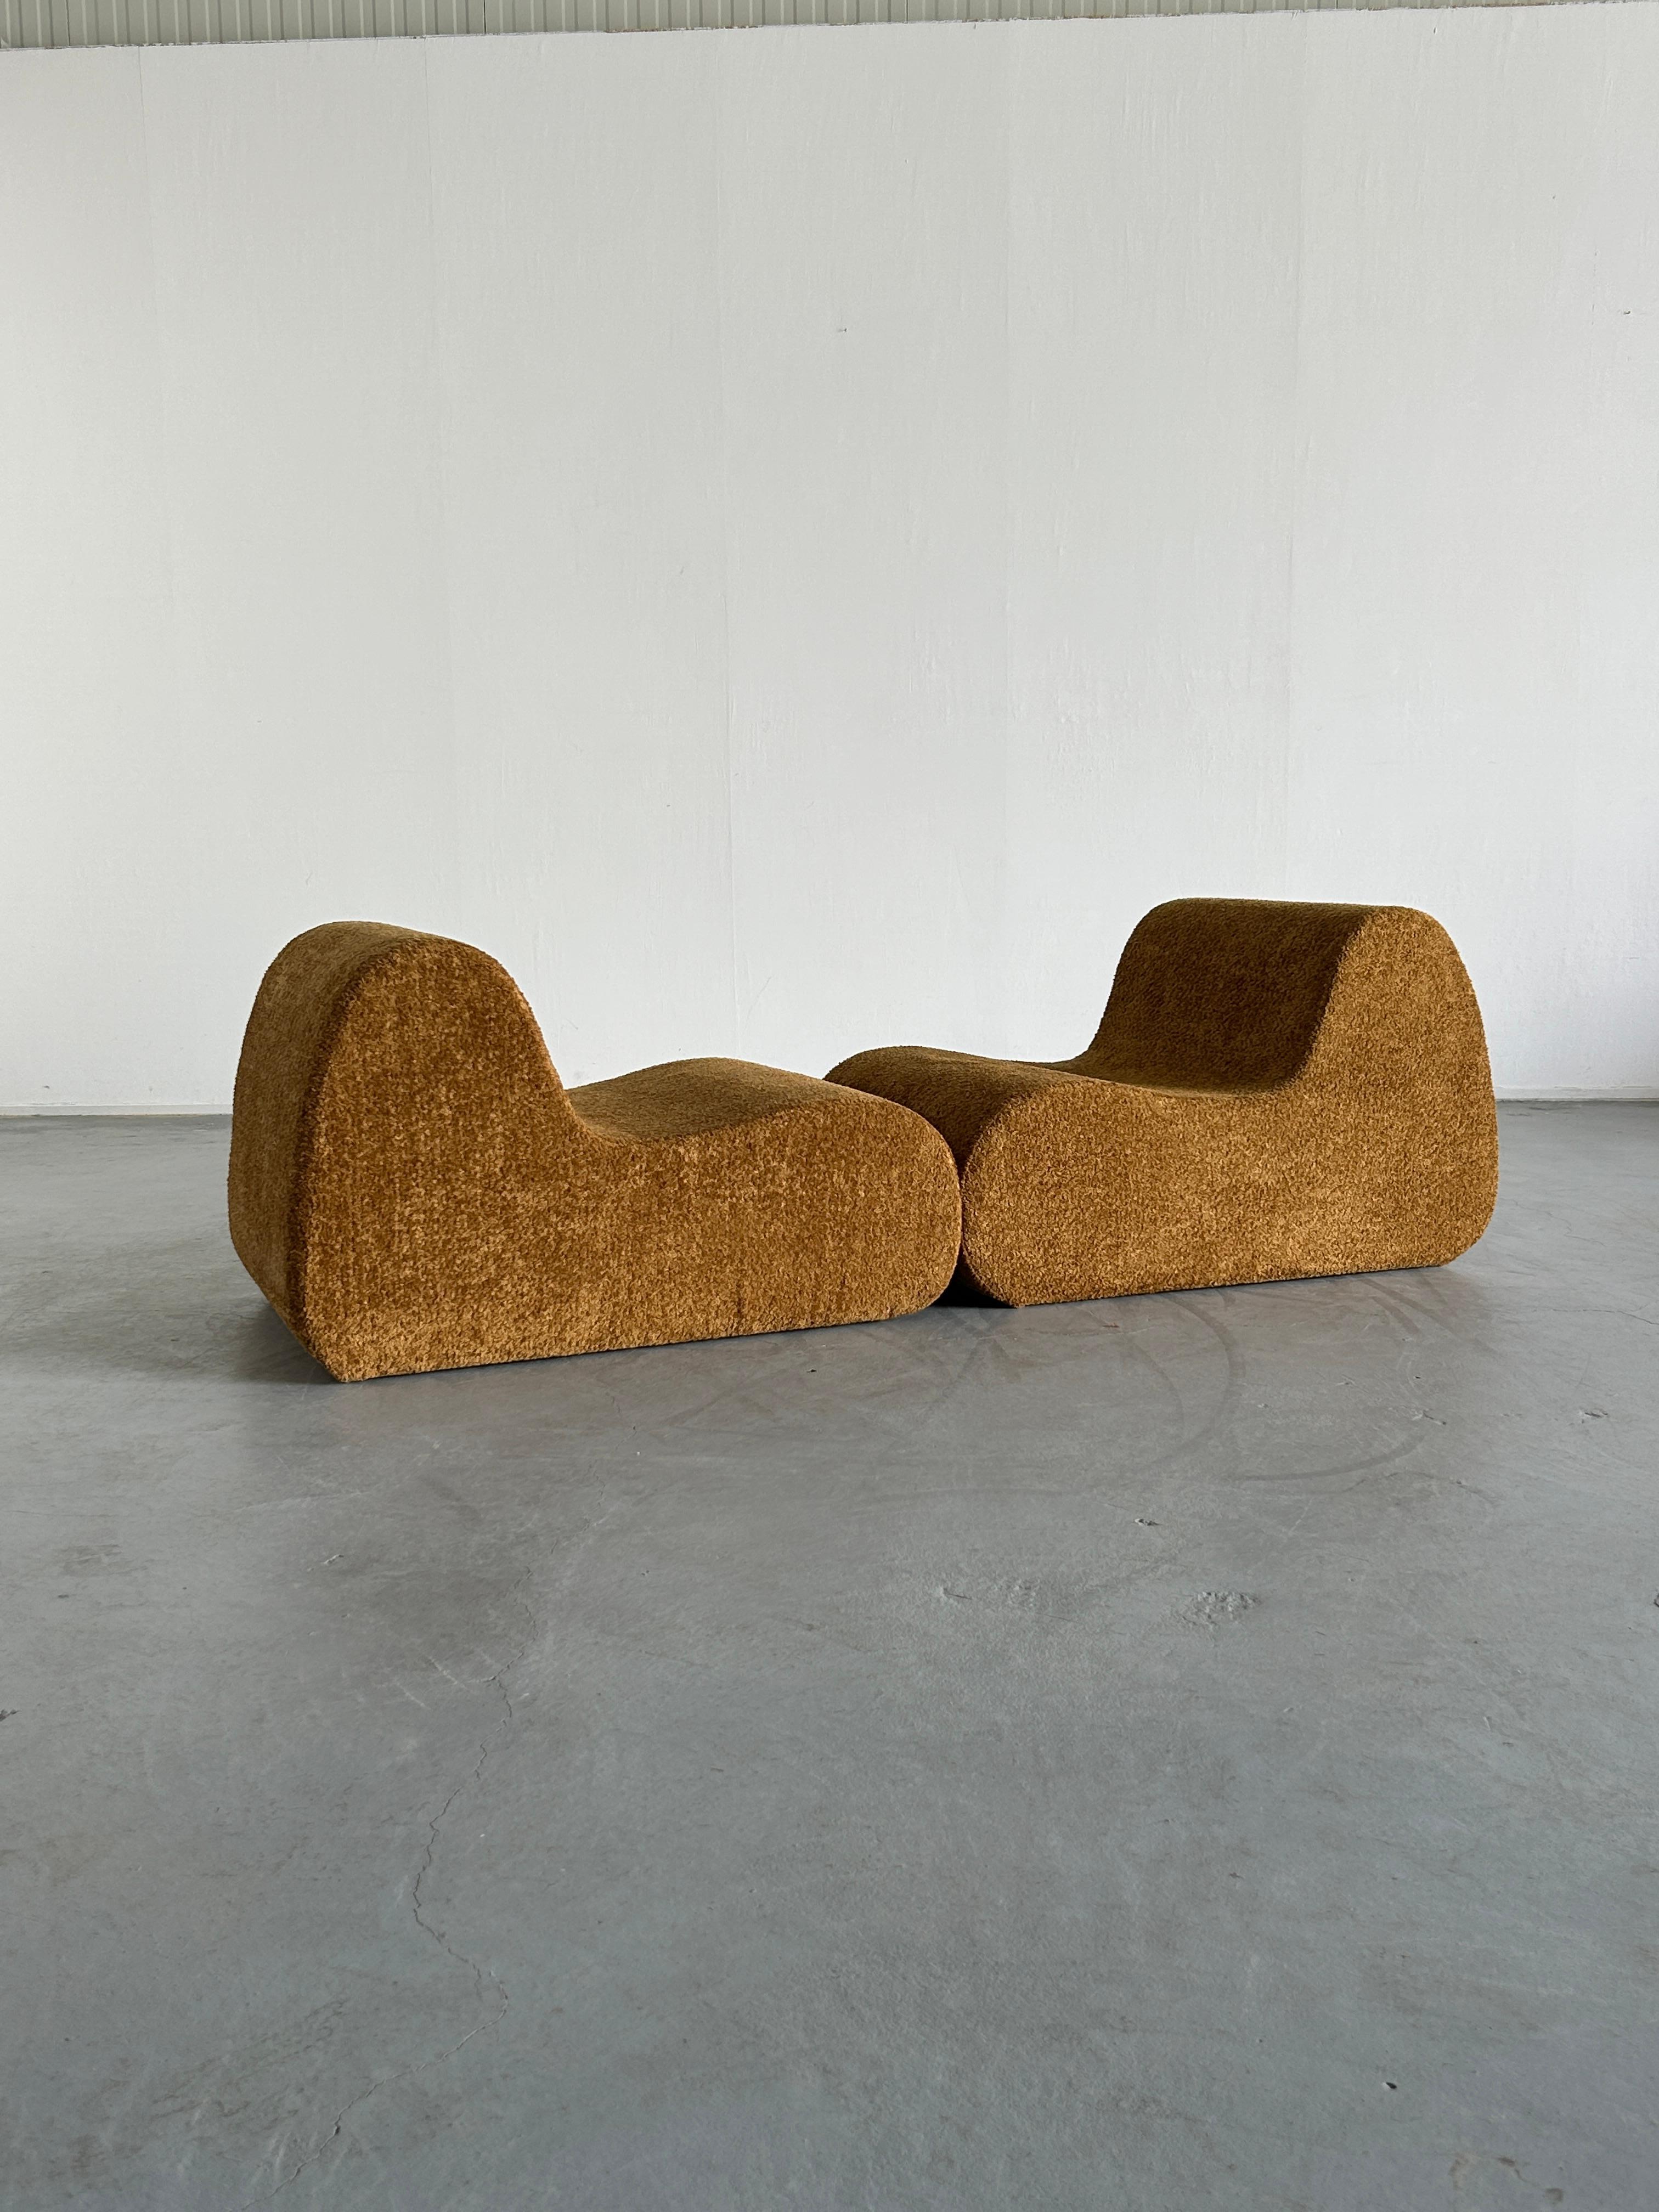 Bouclé Pair of Italian Mid-Century-Modern Lounge Chairs in Ochre Boucle, 1970s Italy For Sale